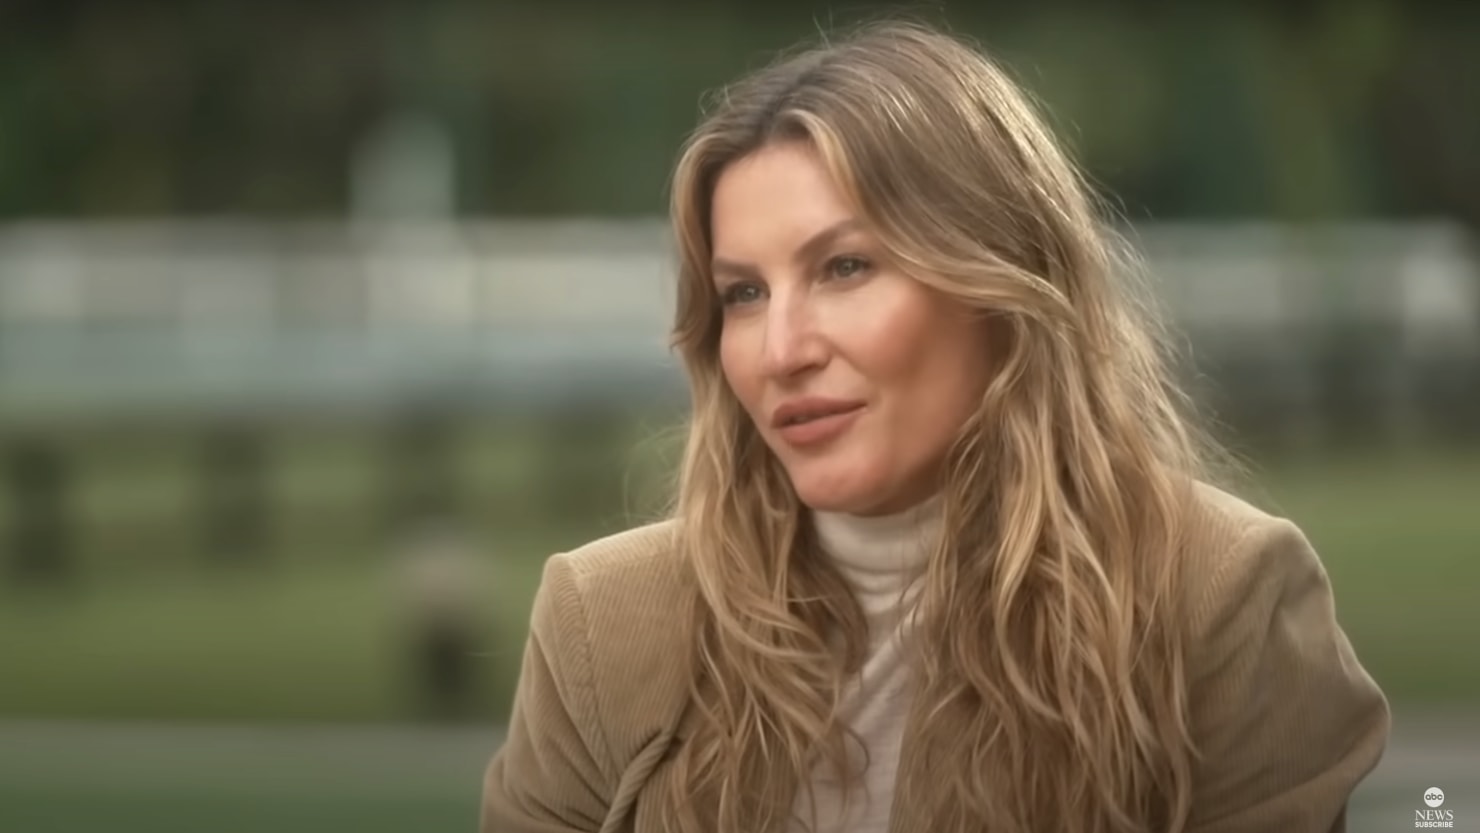 Gisele Bündchen Opens Up About Divorce and Moving On in Emotional Interview with Robin Roberts